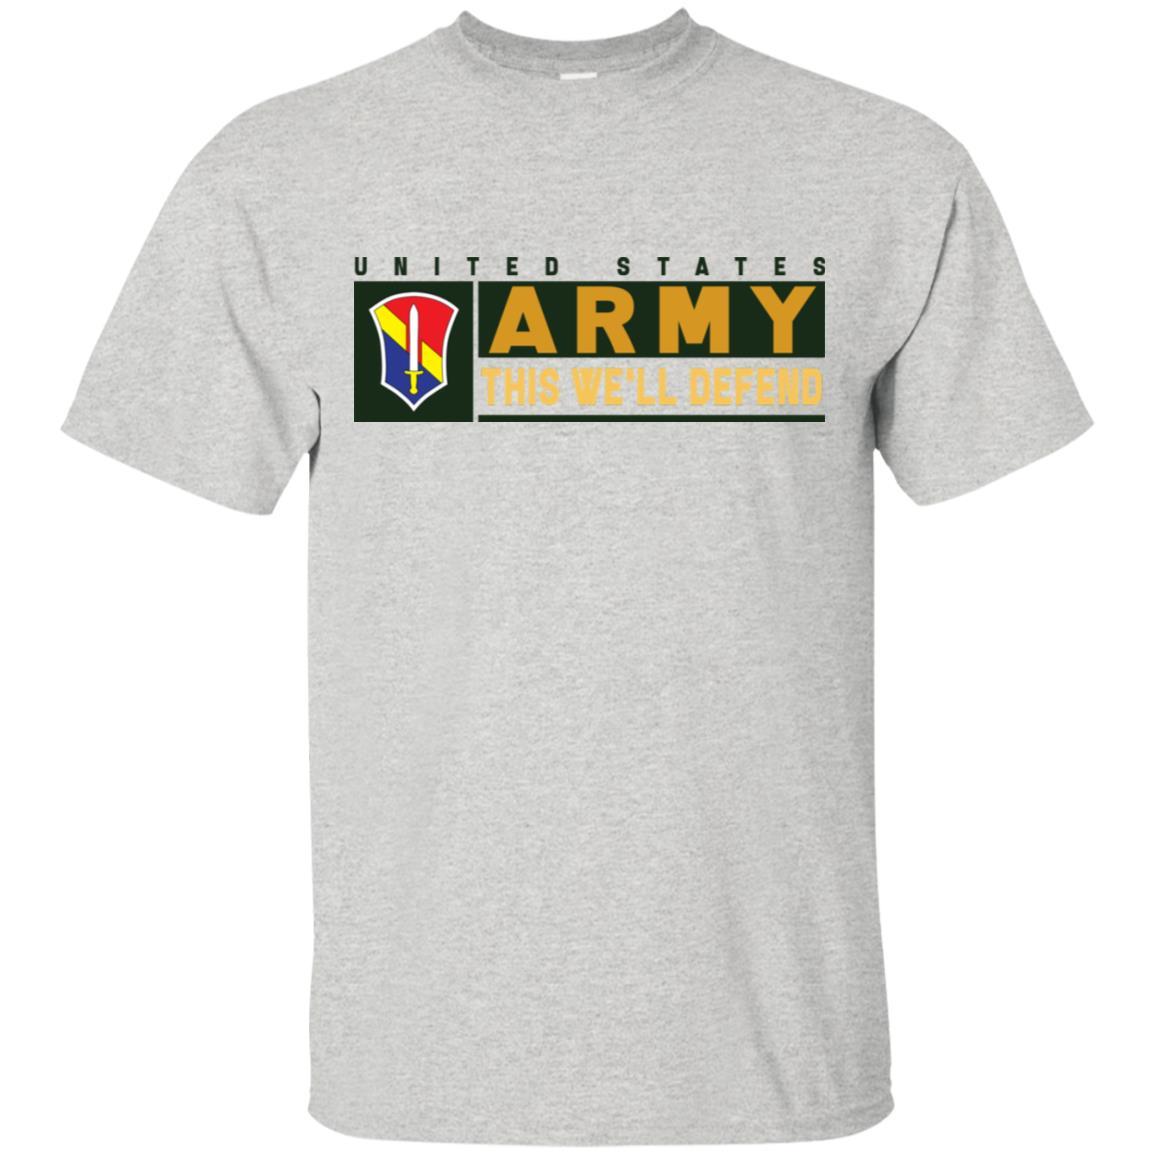 US Army 1 FIELD FORCE VIETNAM- This We'll Defend T-Shirt On Front For Men-TShirt-Army-Veterans Nation